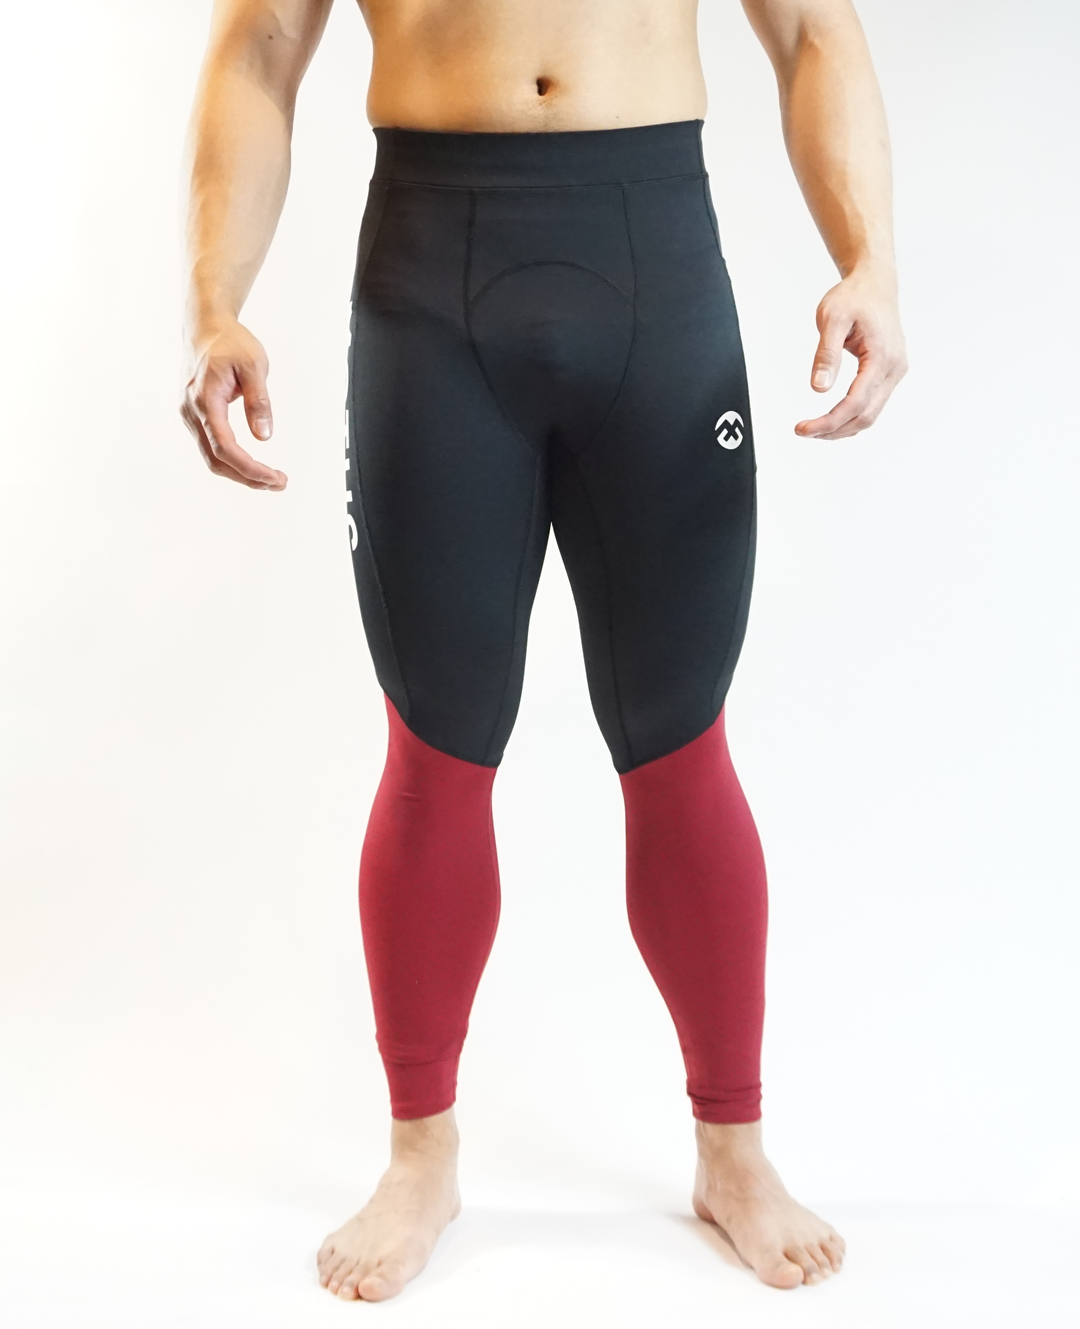 Men's training compression pants in black and red.